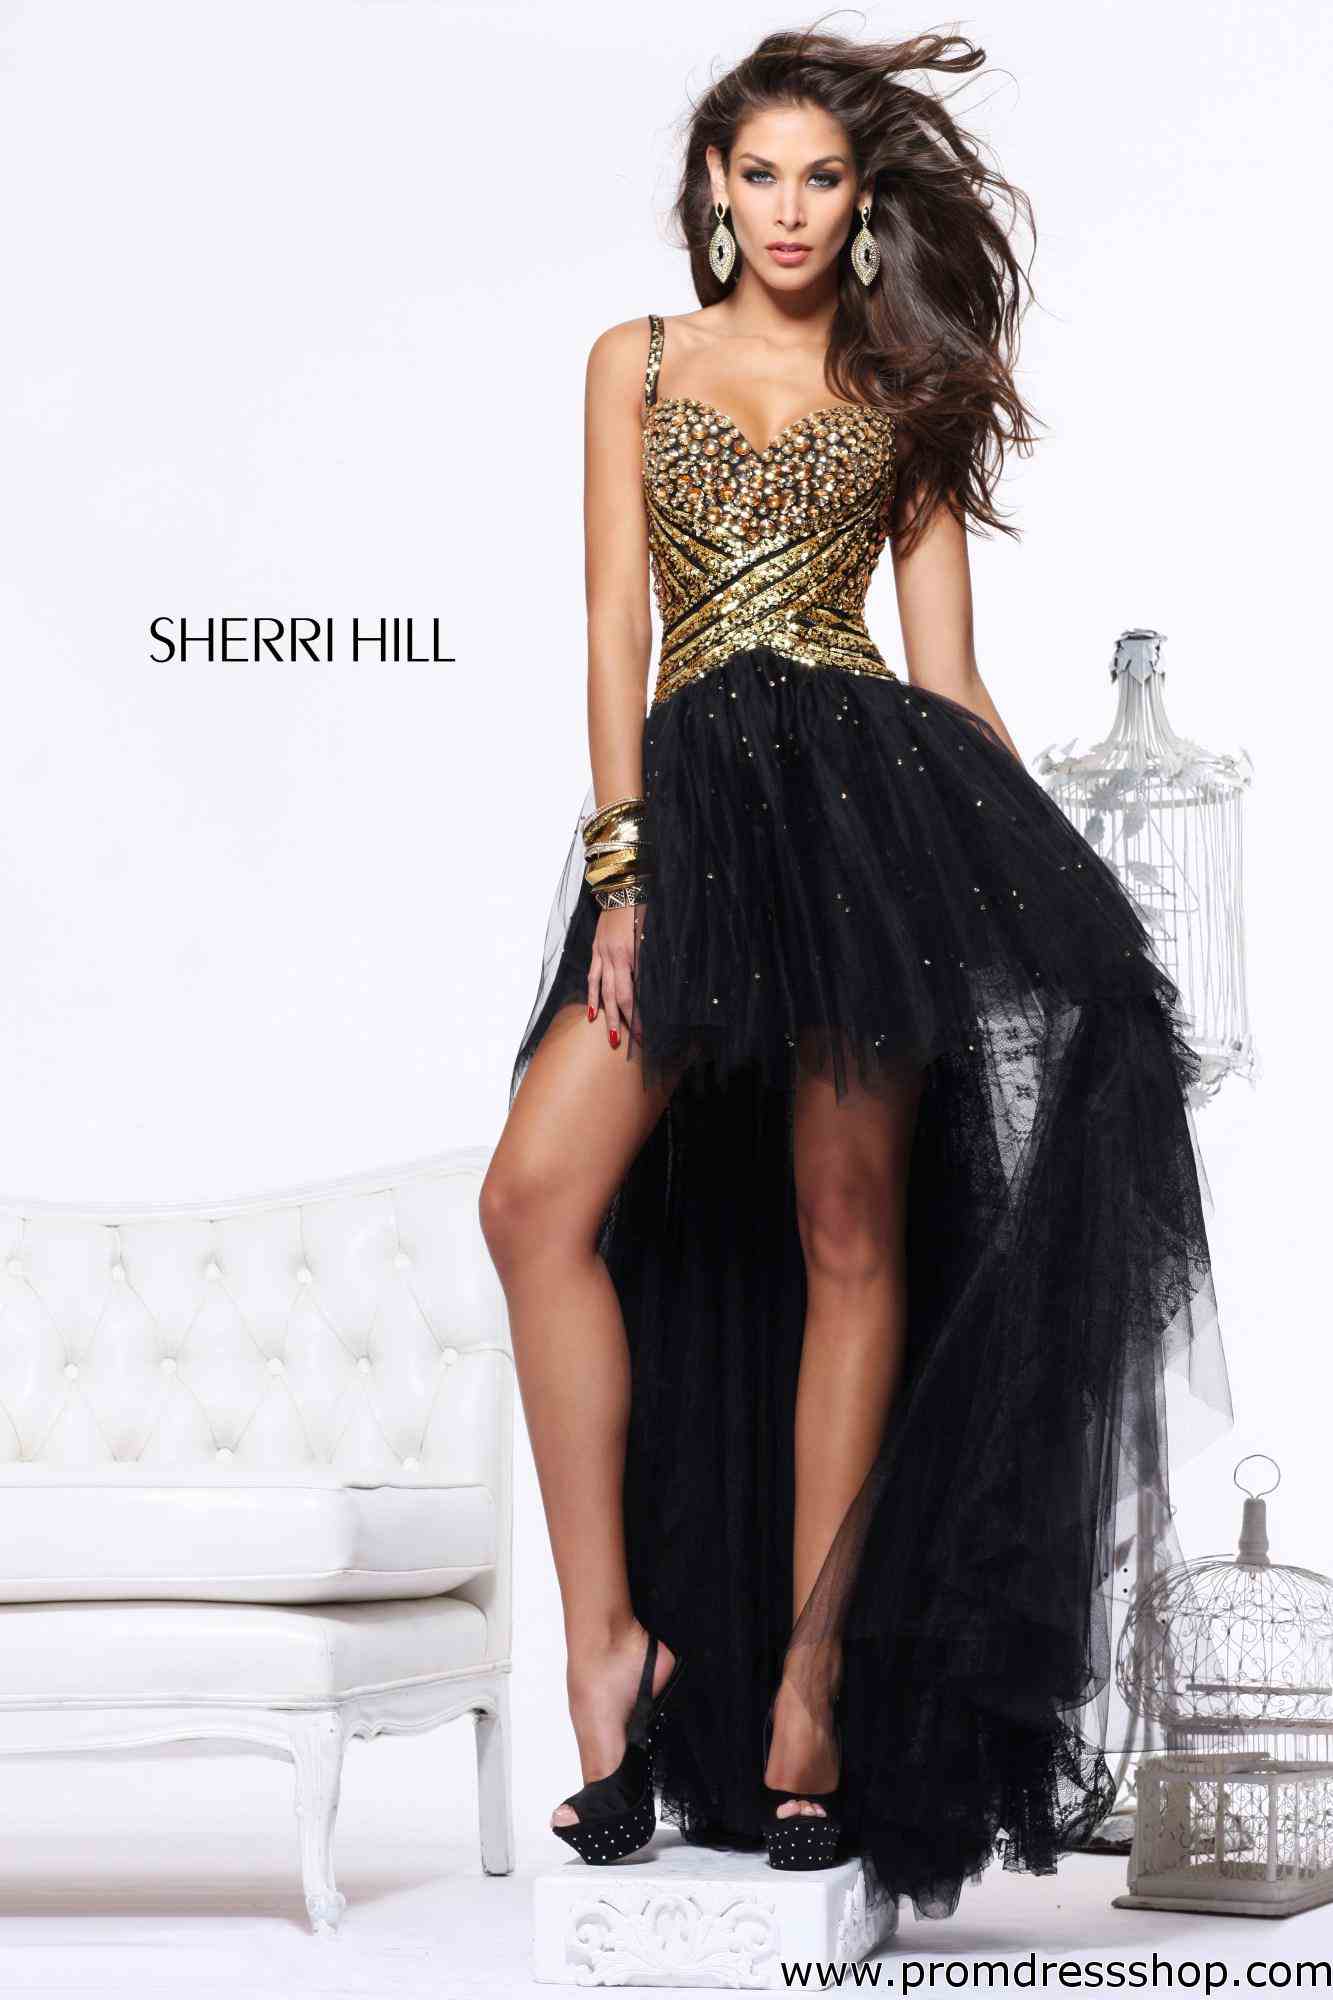 Red Black And Gold Prom Dresses - Online Fashion Review